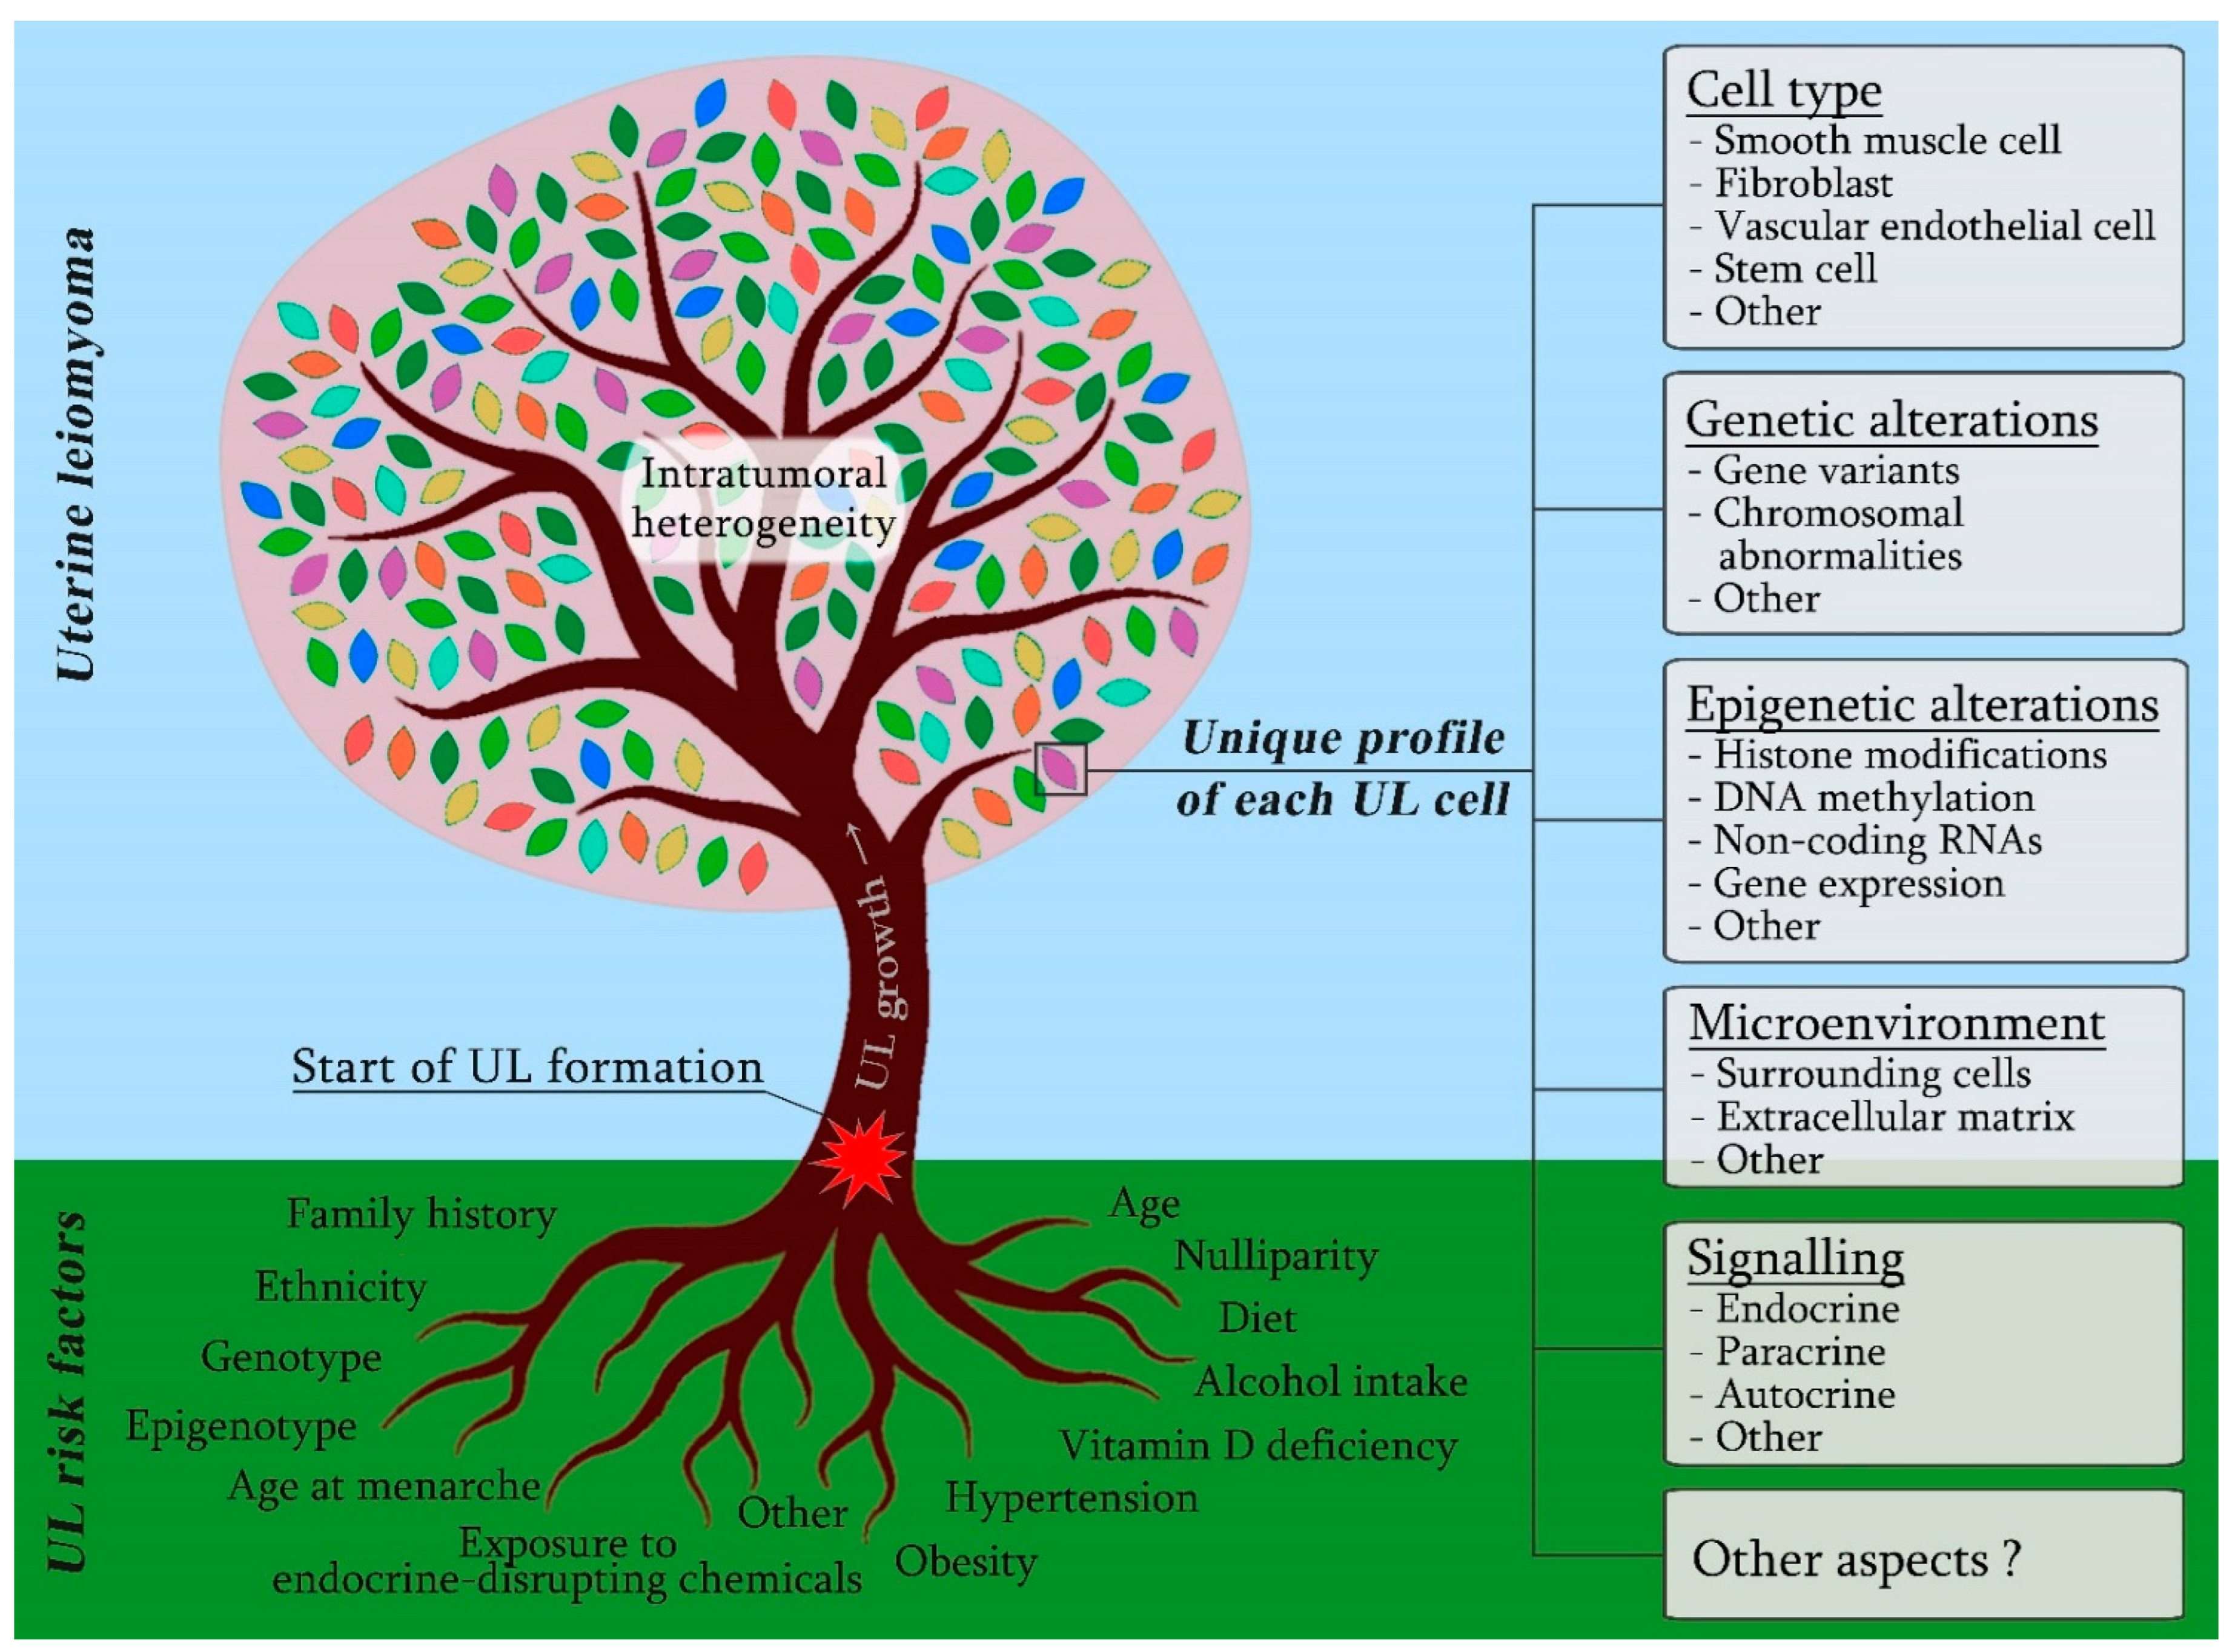 IJMS Free Full-Text A View on Uterine Leiomyoma Genesis through the Prism of Genetic, Epigenetic and Cellular Heterogeneity